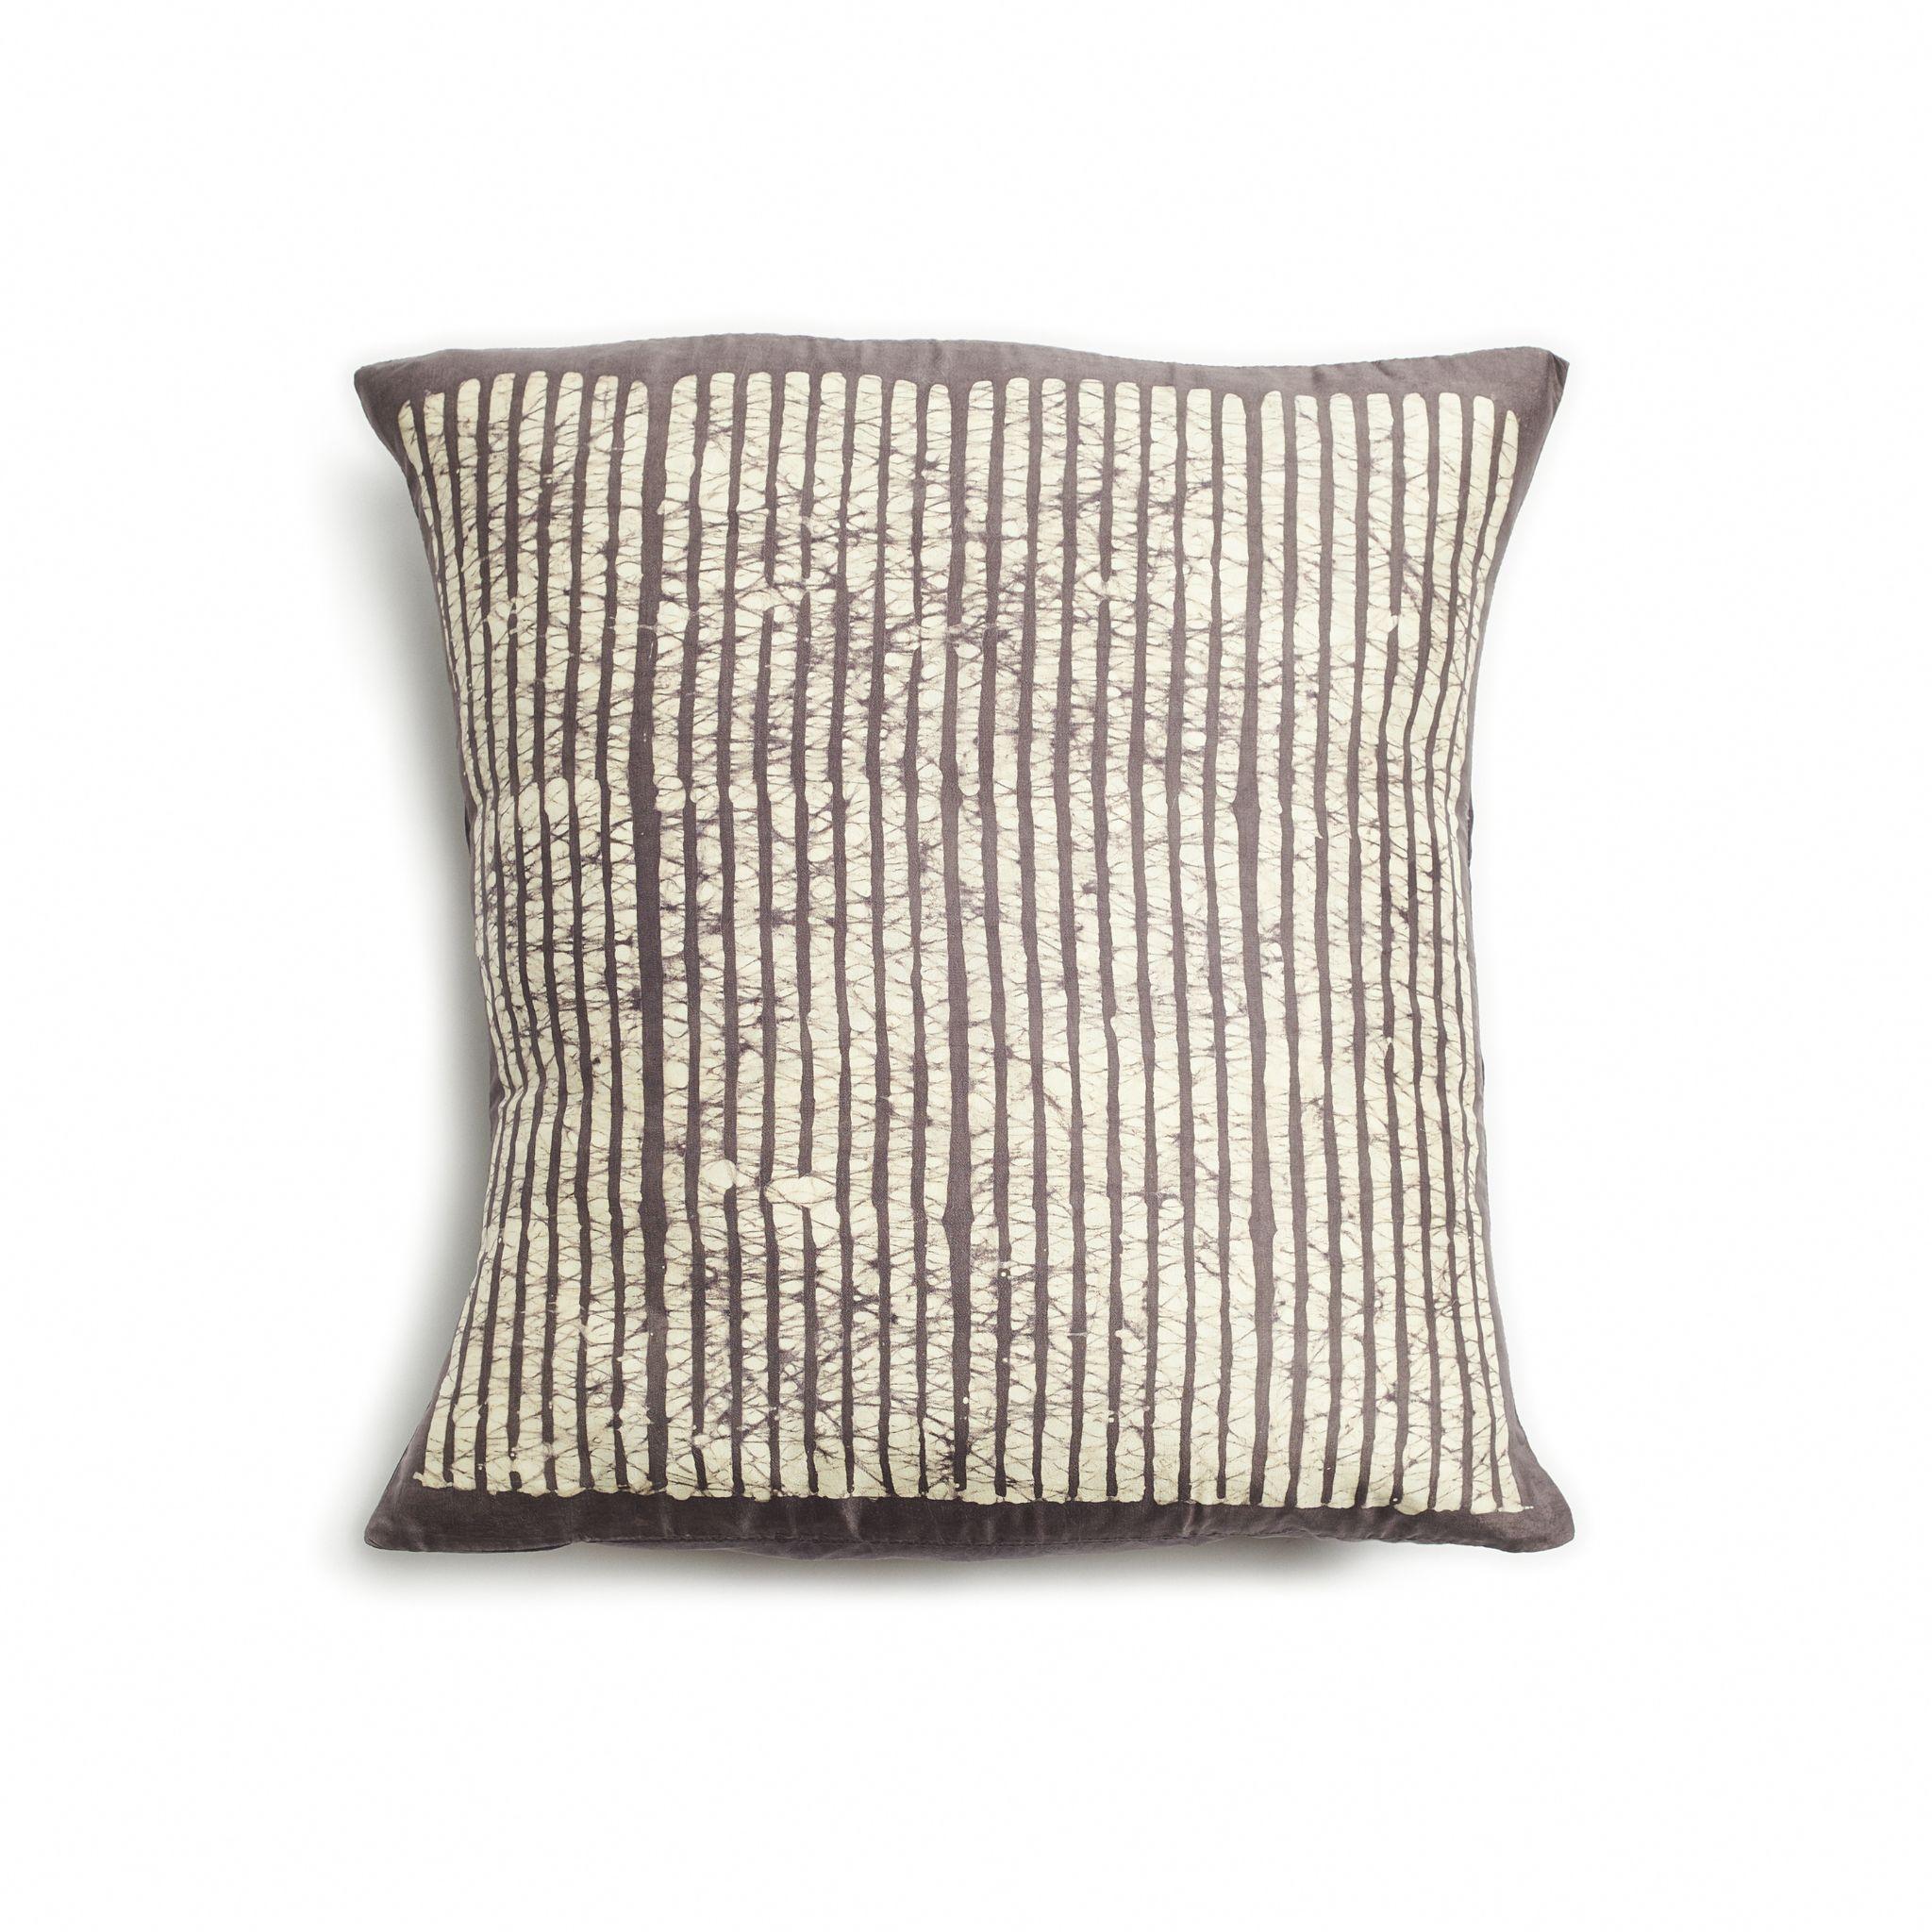 Modern Maple Black Silk Pillow In Stripes Motifs Handcrafted By Artisans  For Sale